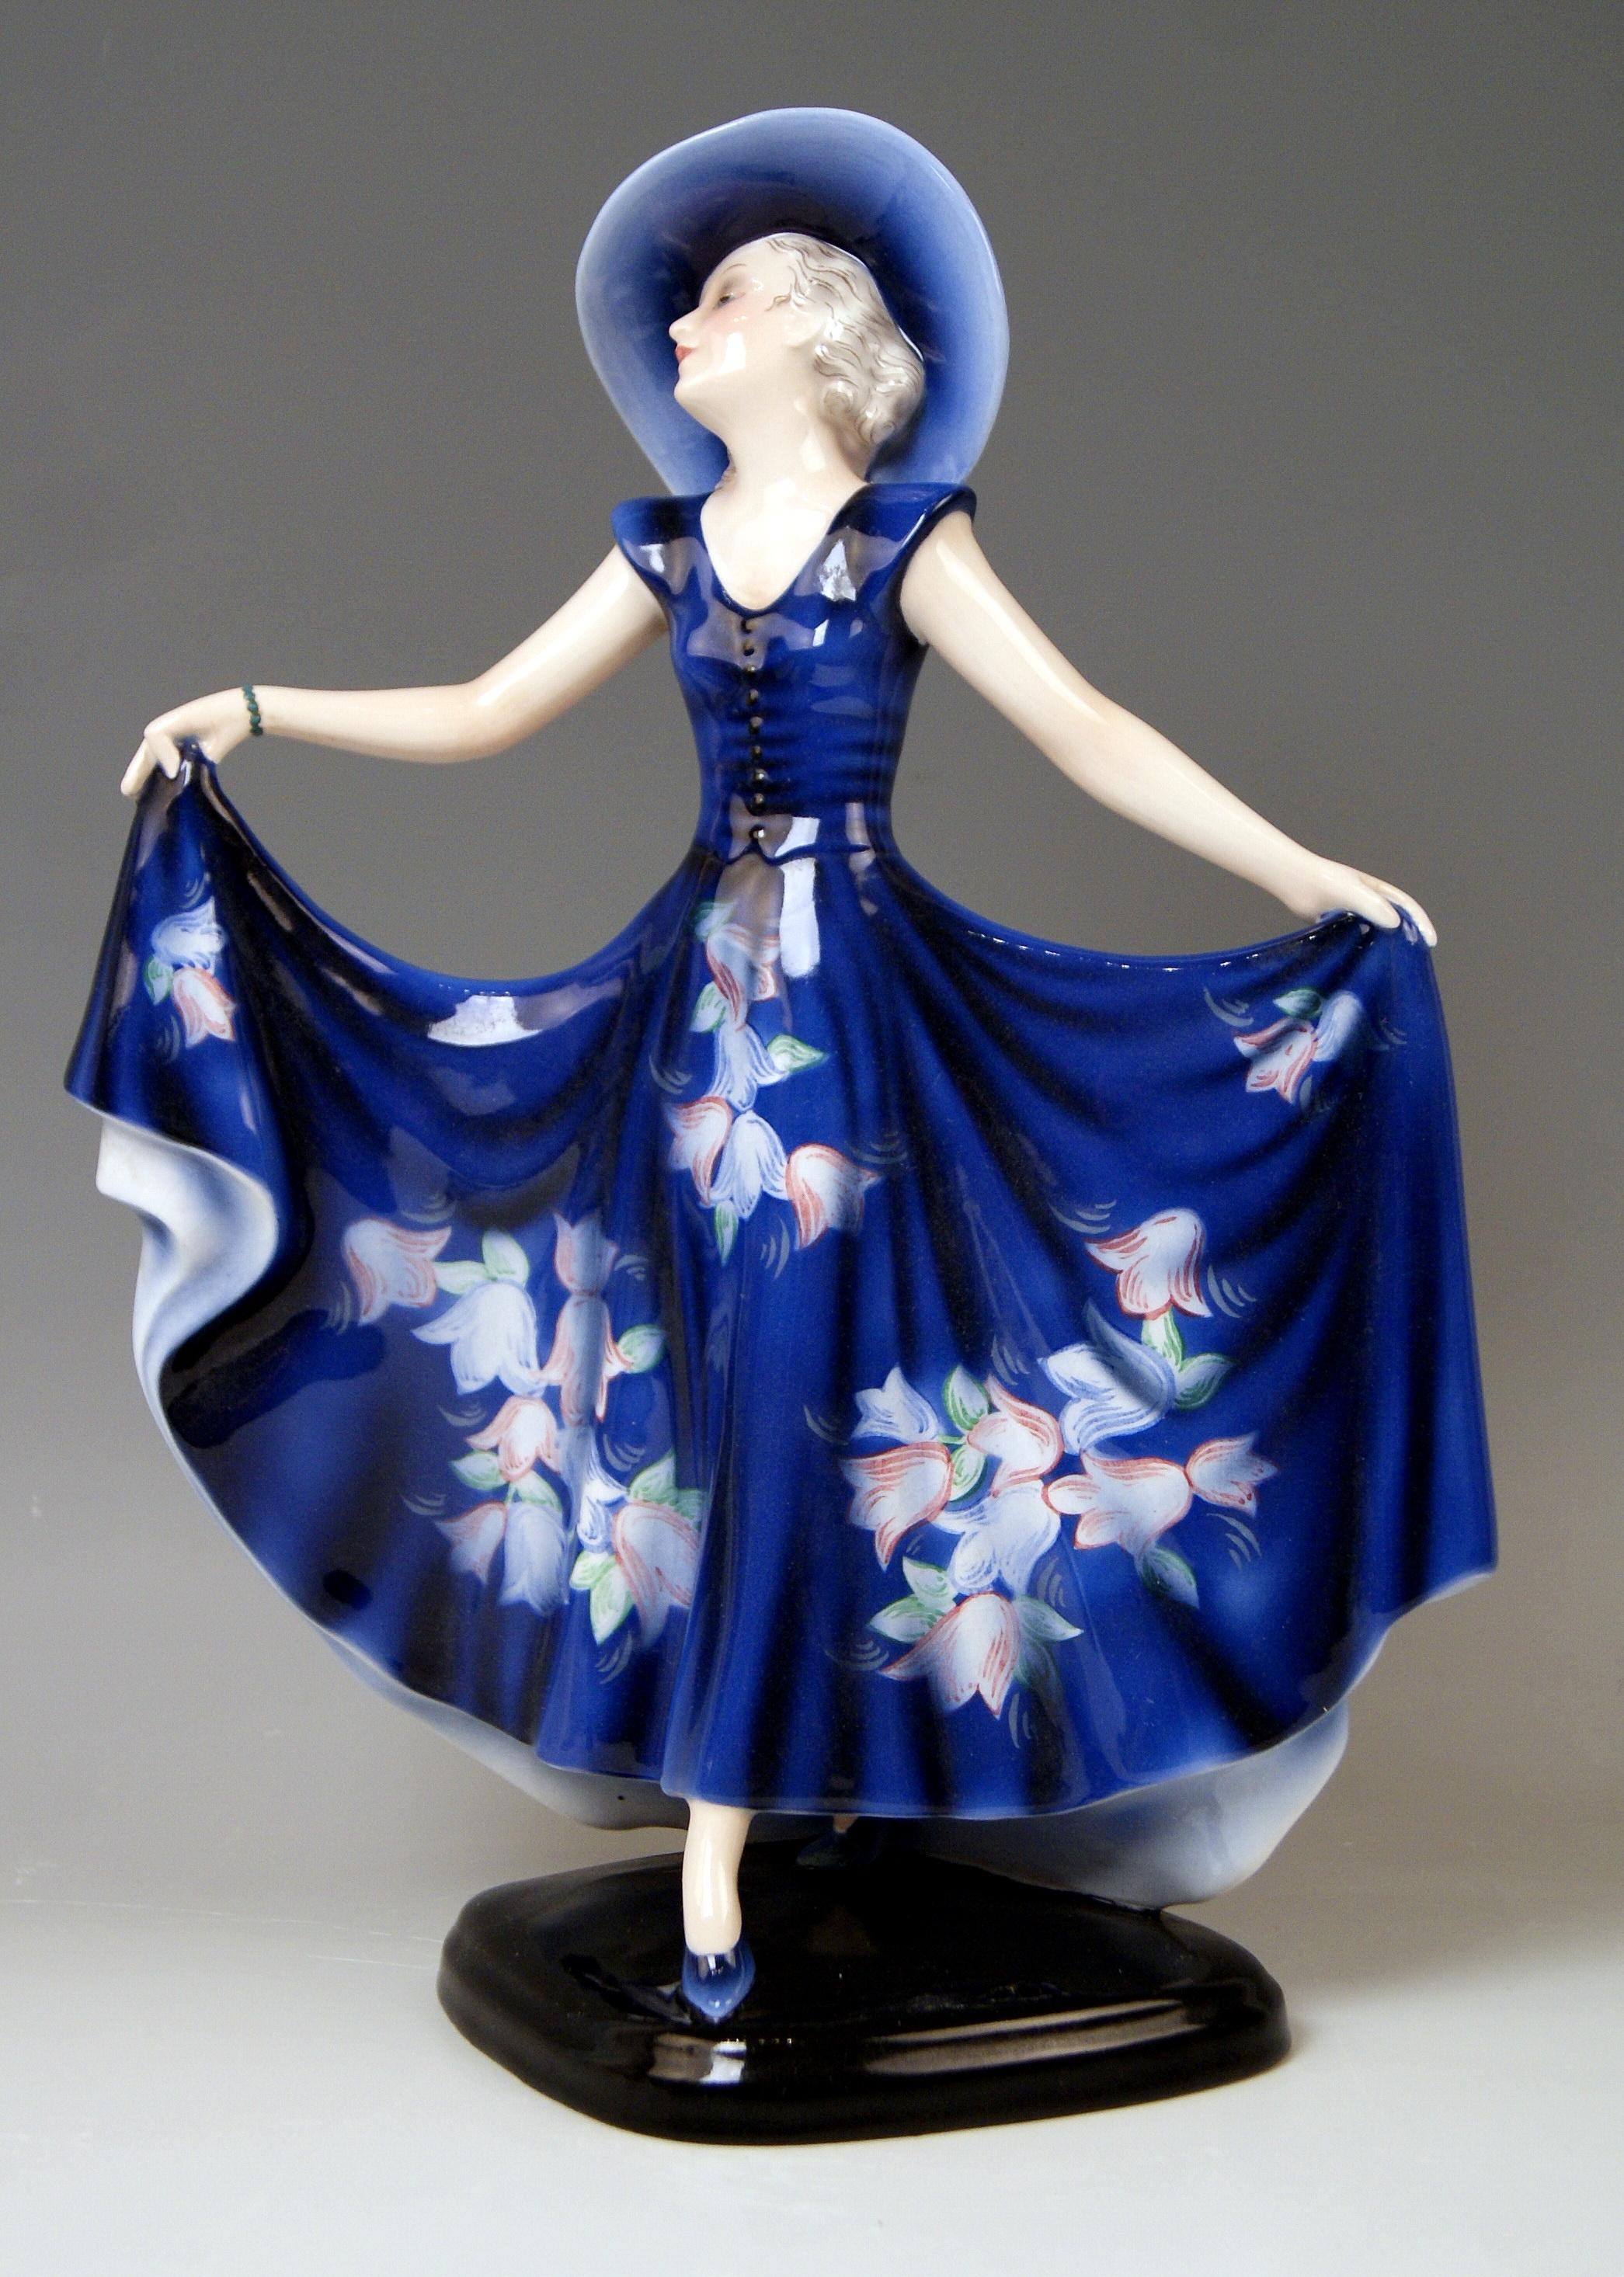 Goldscheider Vienna lady dancer liane wide-brimmed hat clad in blue dress.

Designed by Josef Lorenzl (1892-1950) / one of most important designers having been active for Goldscheider manufactory in period of 1920-1940 / designed, circa